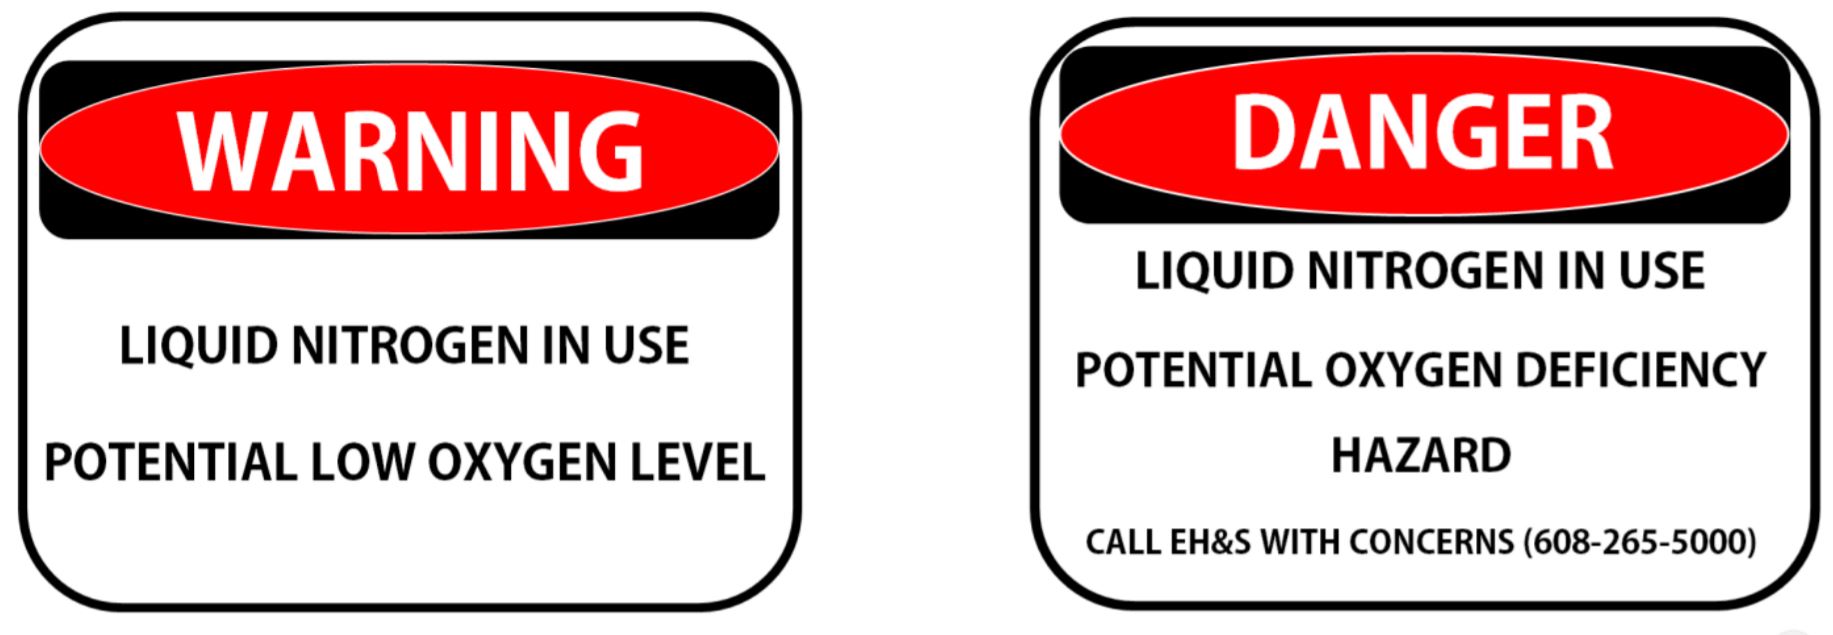 Examples of both a Warning sign and a Danger sign